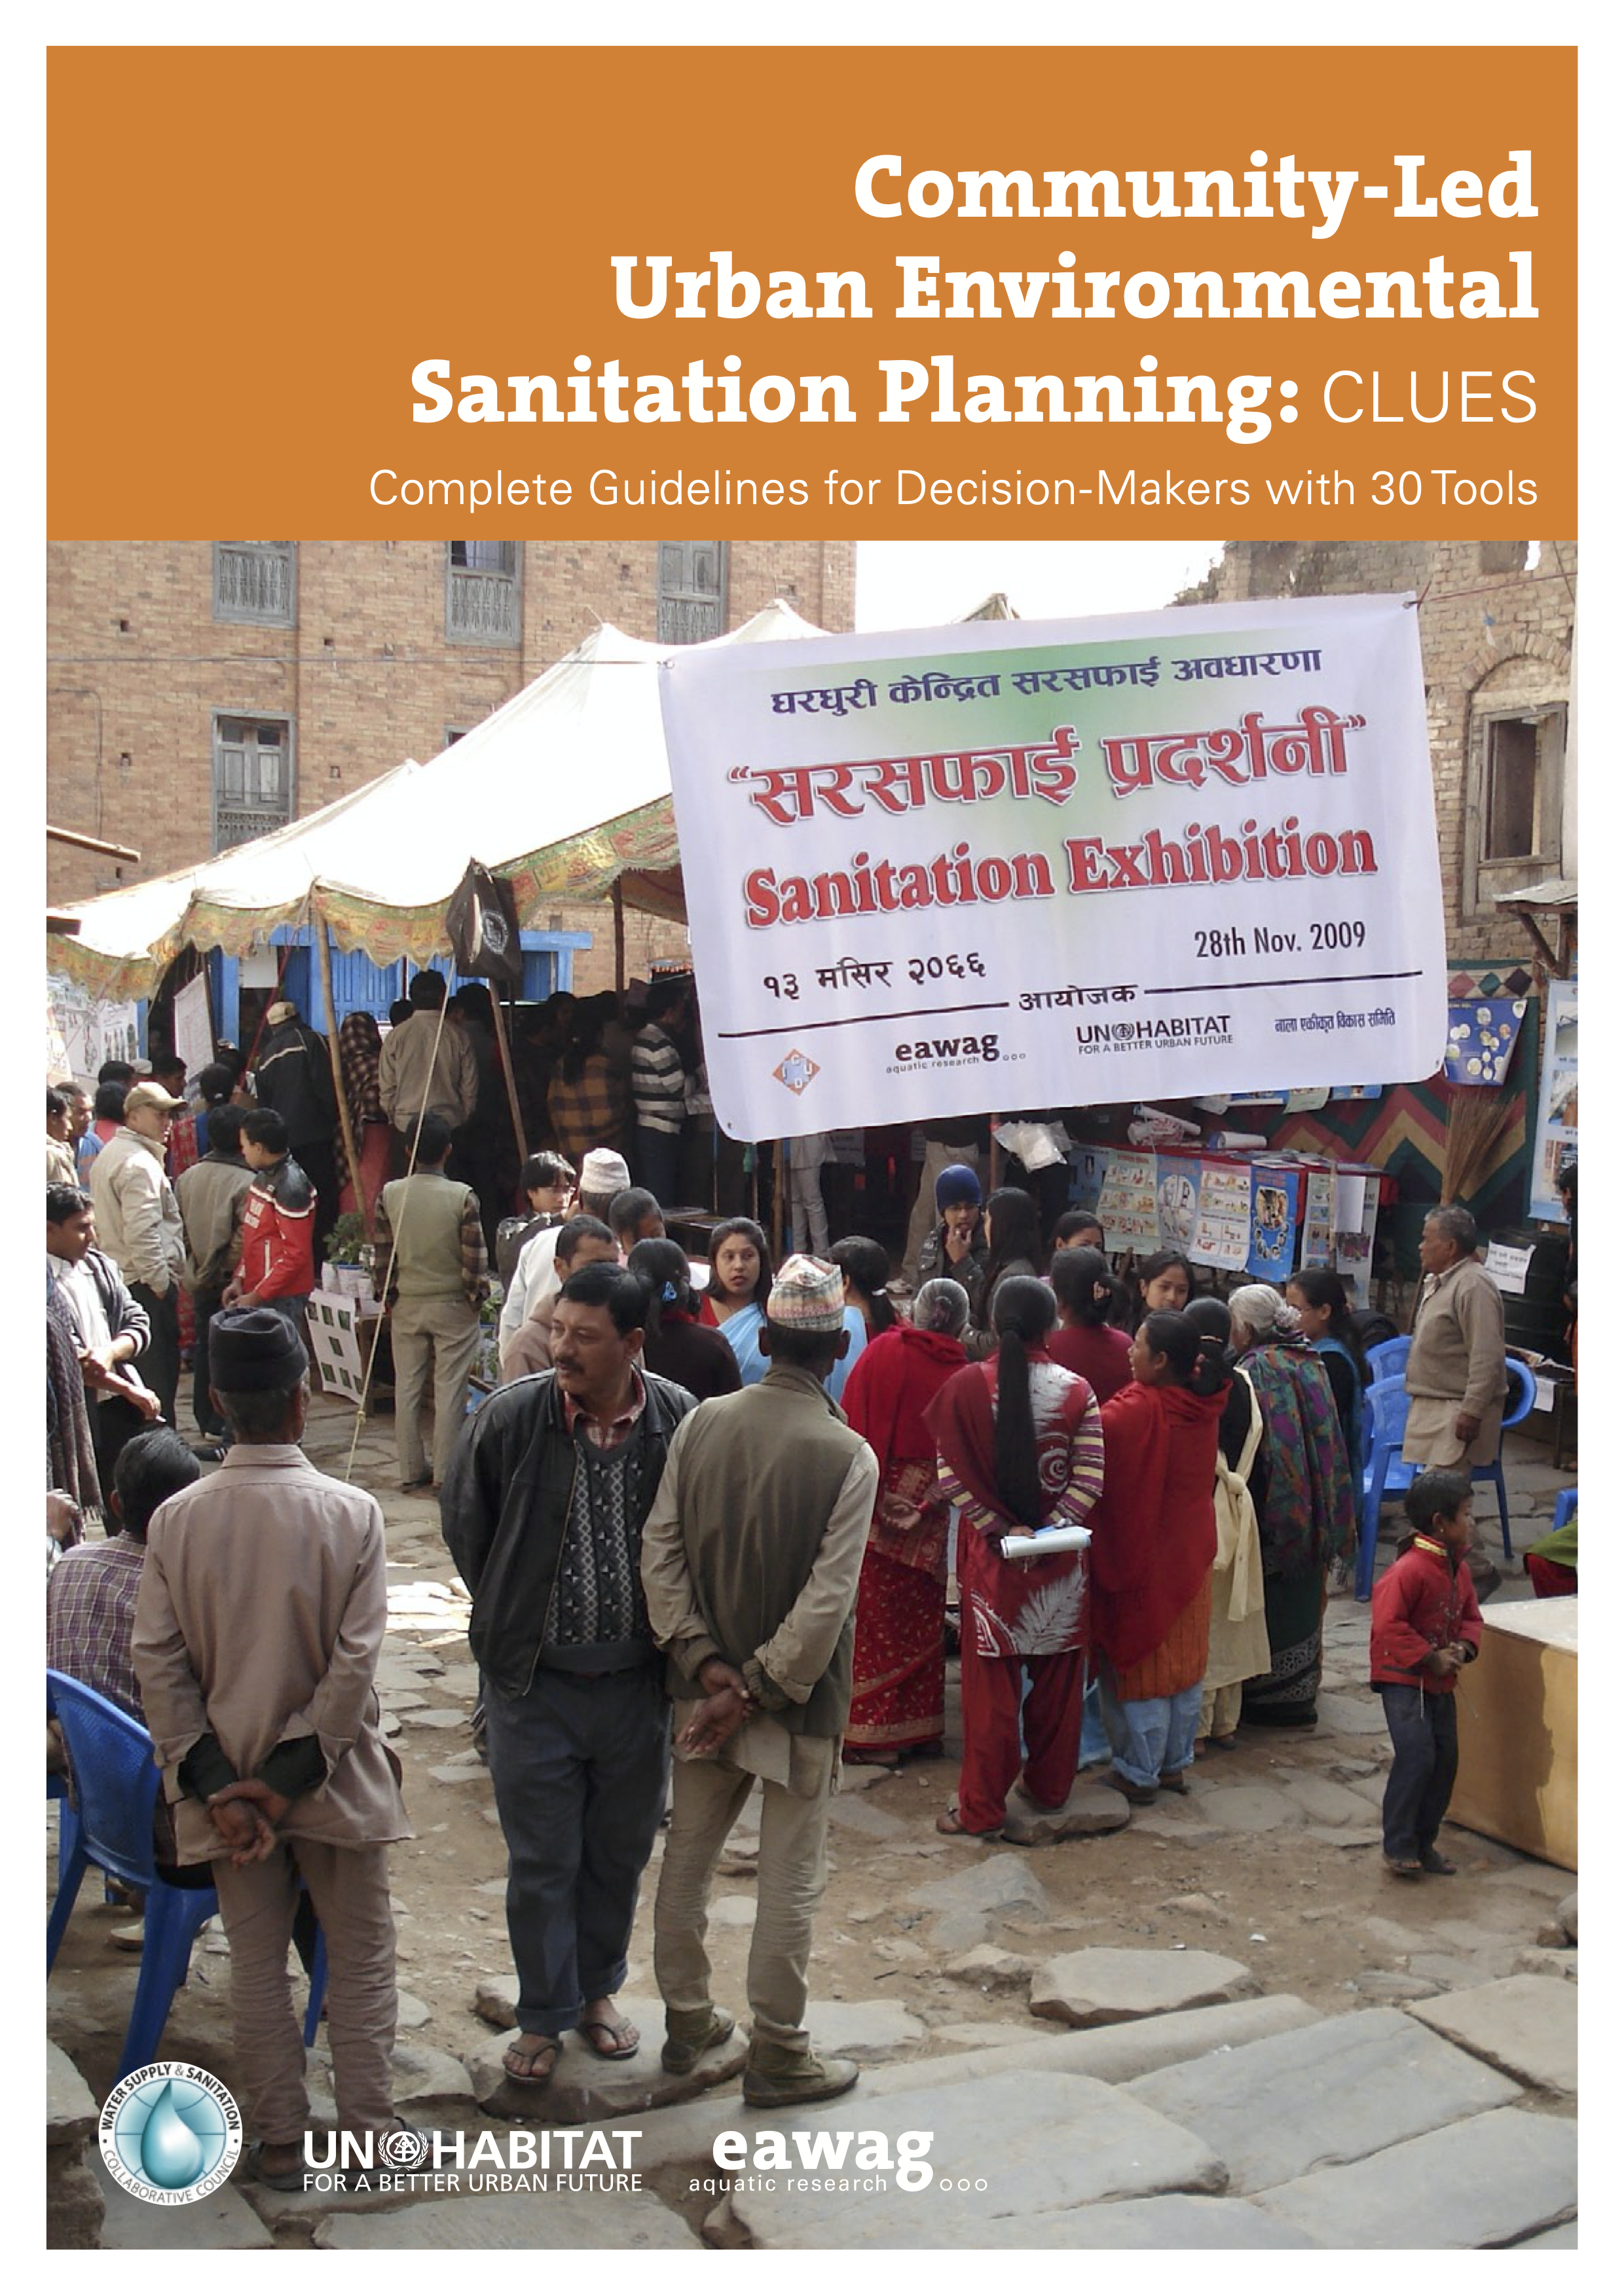 Community-Led Urban Environmental Sanitation Planning (CLUES) is a multi-sector and multi-actor guideline emphasising the participation of all stakeholders from an early stage of the planning process. It emphasises the importance of the enabling environment and provides specific tools that help to put the methodology into practice.      Lüthi, C., Morel, A., Tilley, E., and Ulrich, L. (2011) Community-Led Urban Environmental Sanitation Planning (CLUES). Swiss Federal Institute of Aquatic Science and Technology (Eawag), Dübendorf, Switzerland. 